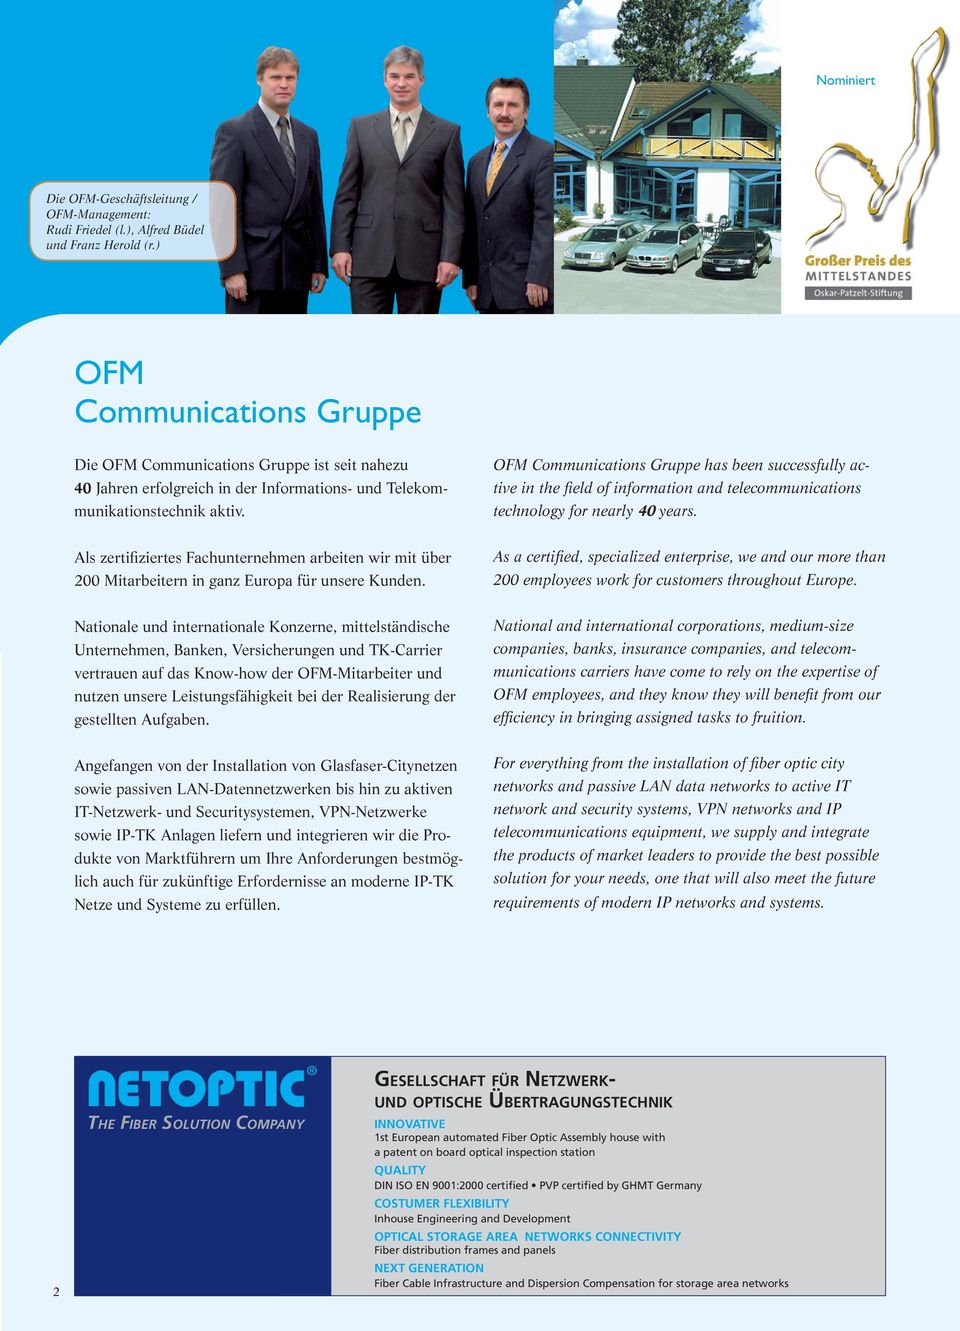 OFM Communications Gruppe has been successfully active in the field of information and telecommunications technology for nearly 40 years.